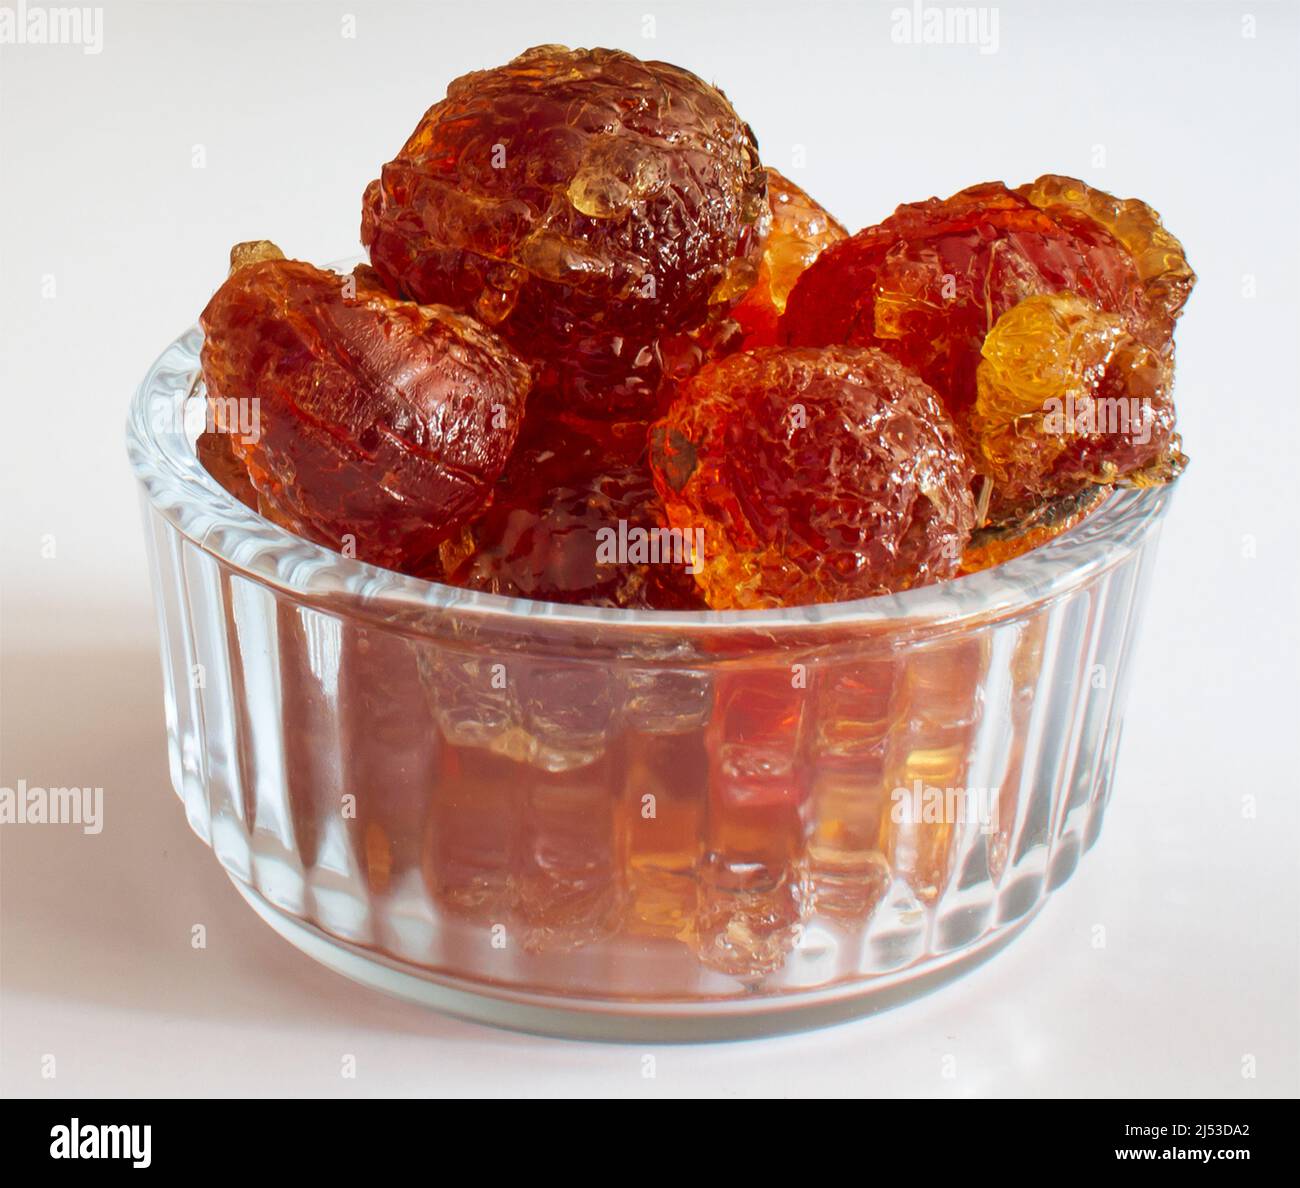 gum arabic chunky pieces in glass bowl closeup on white background Stock Photo